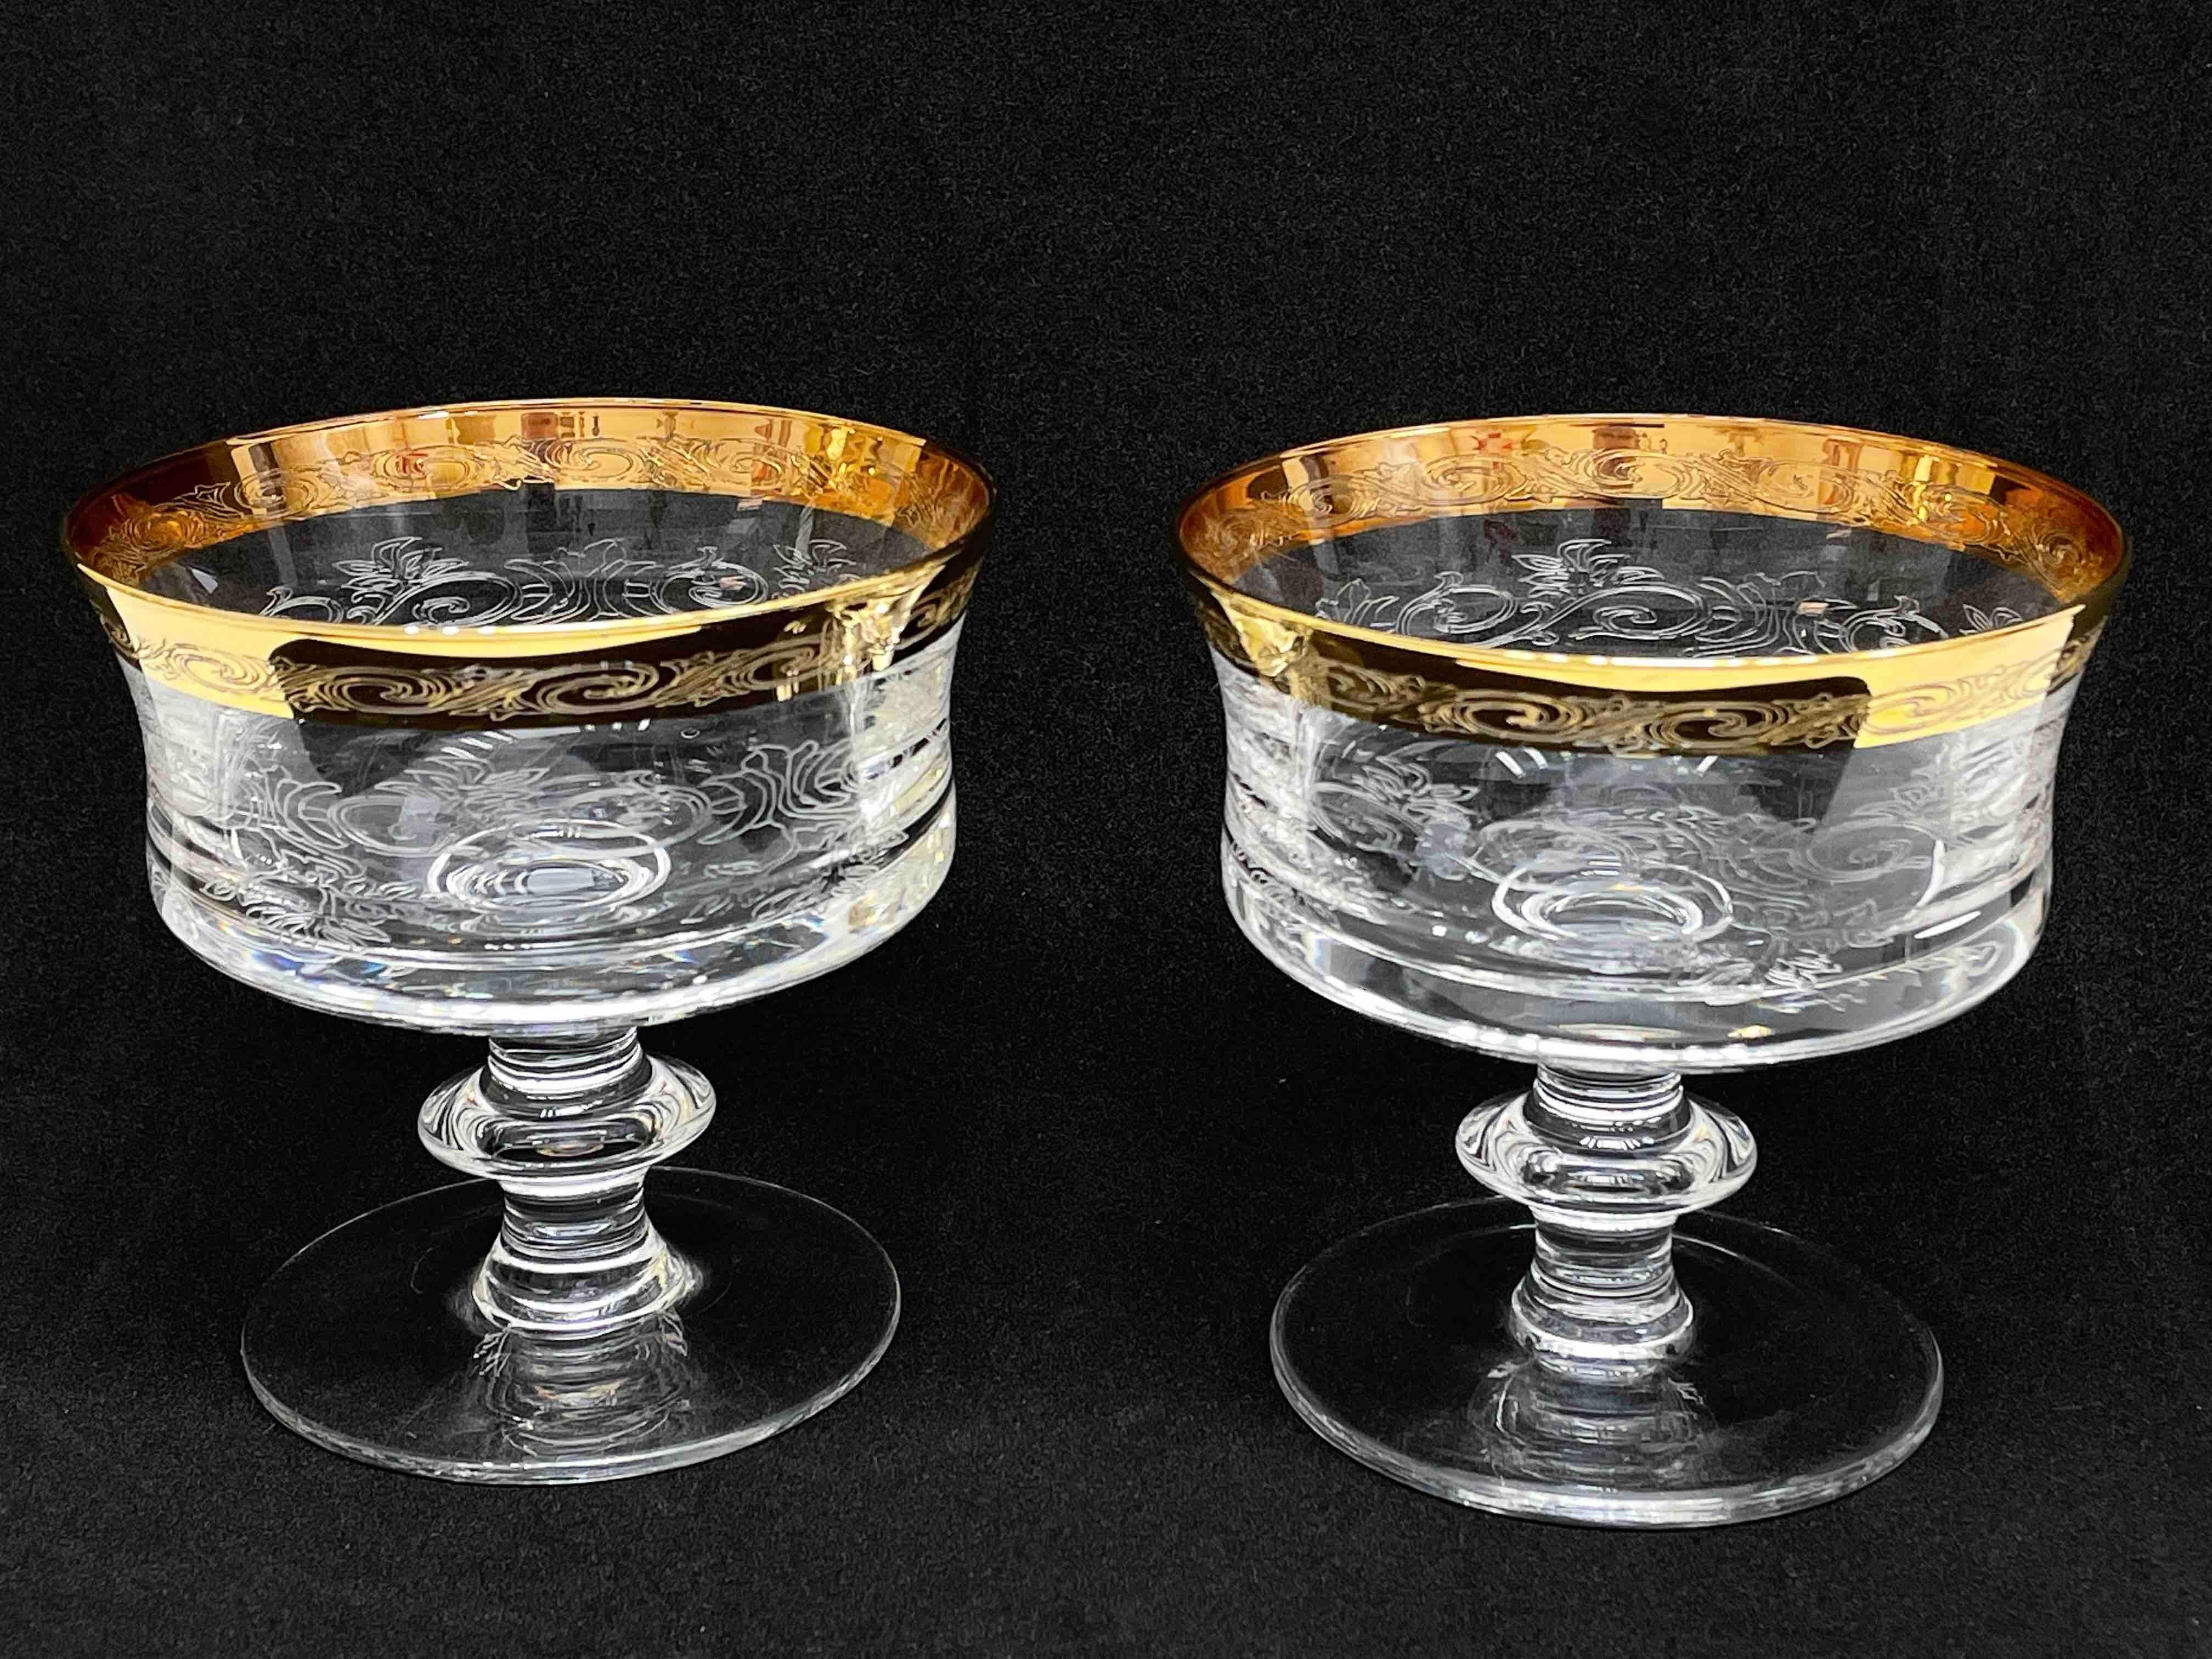 Set of Six Glass Champagne Goblets with 24k Gold Rim, Moser Glass Carlsbad 1